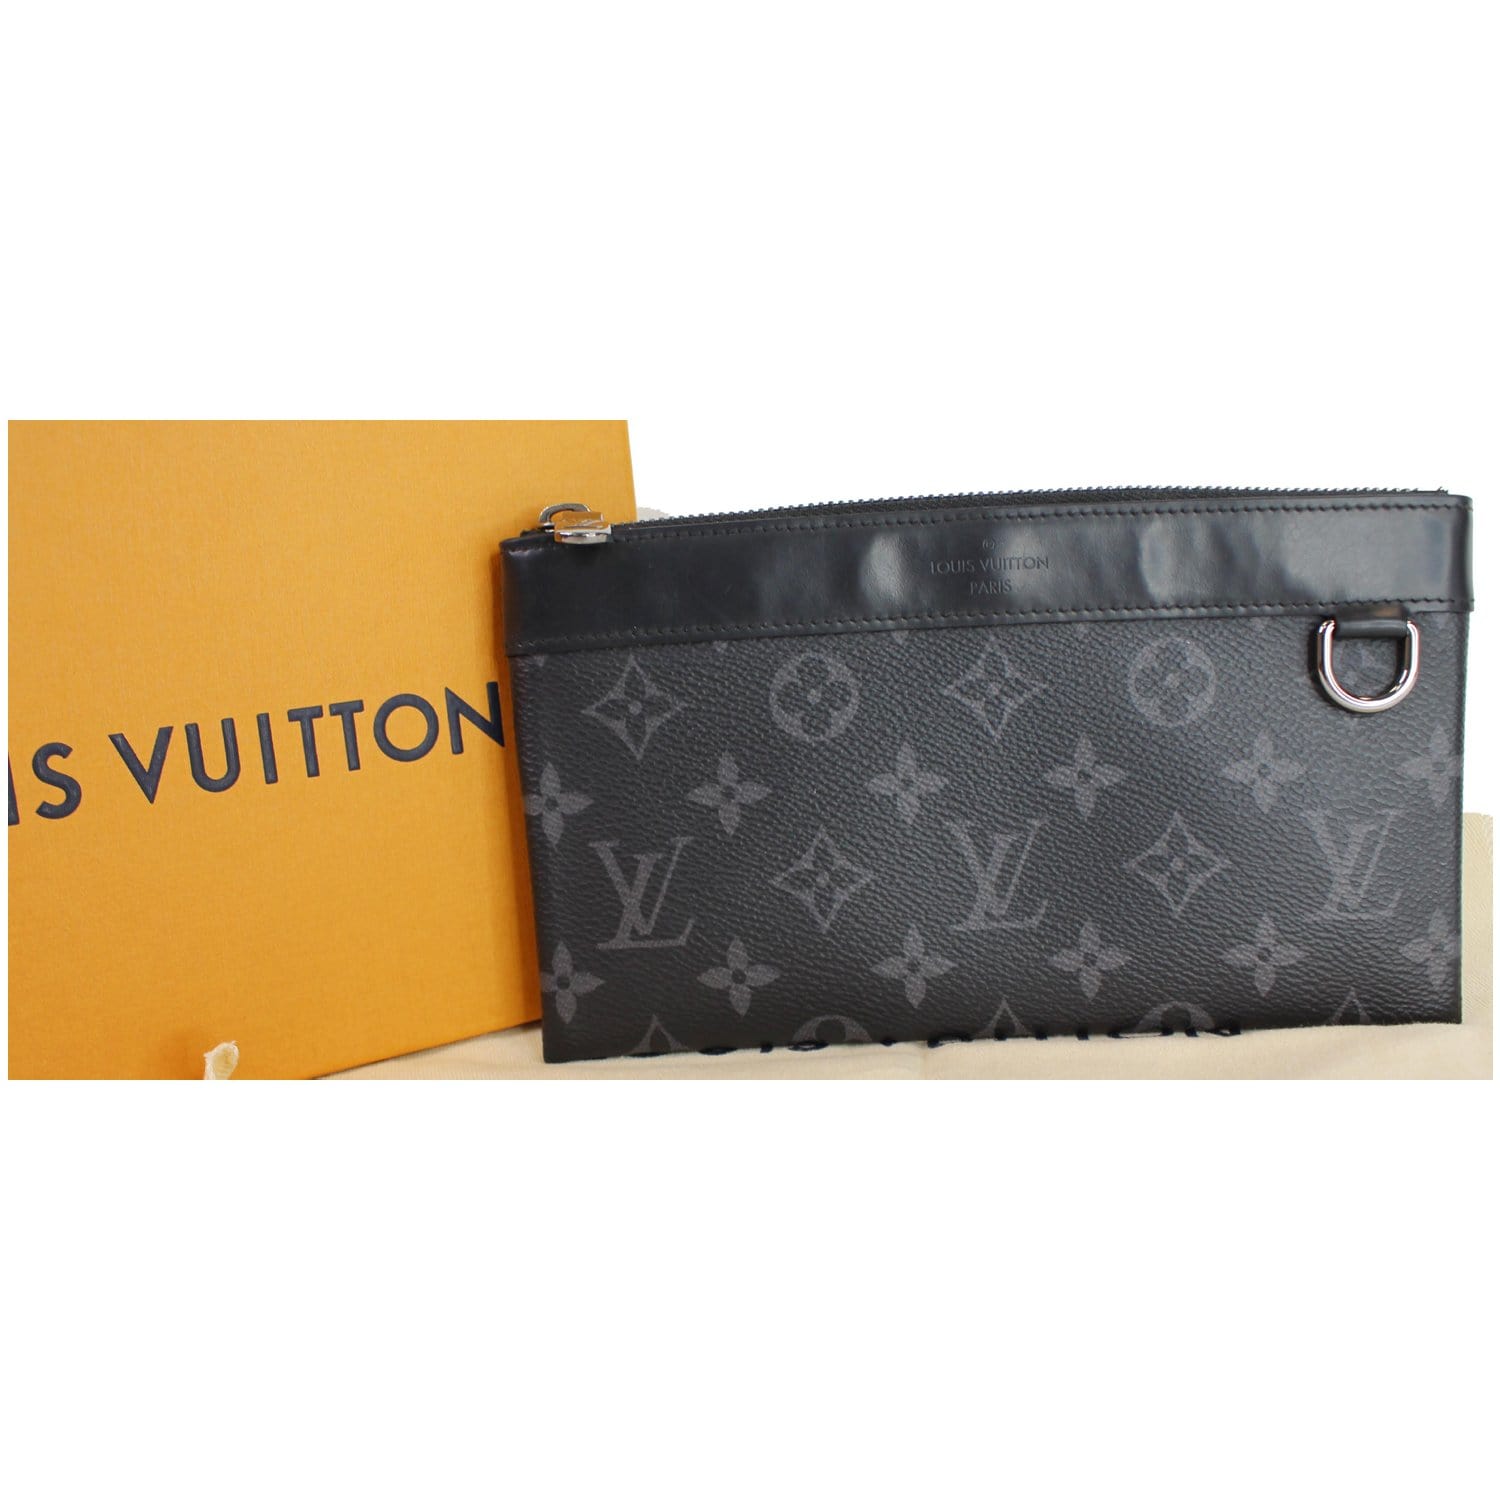 🔥NEW LOUIS VUITTON DISCOVERY POCHETTE PM POUCH Cobalt Taigarama